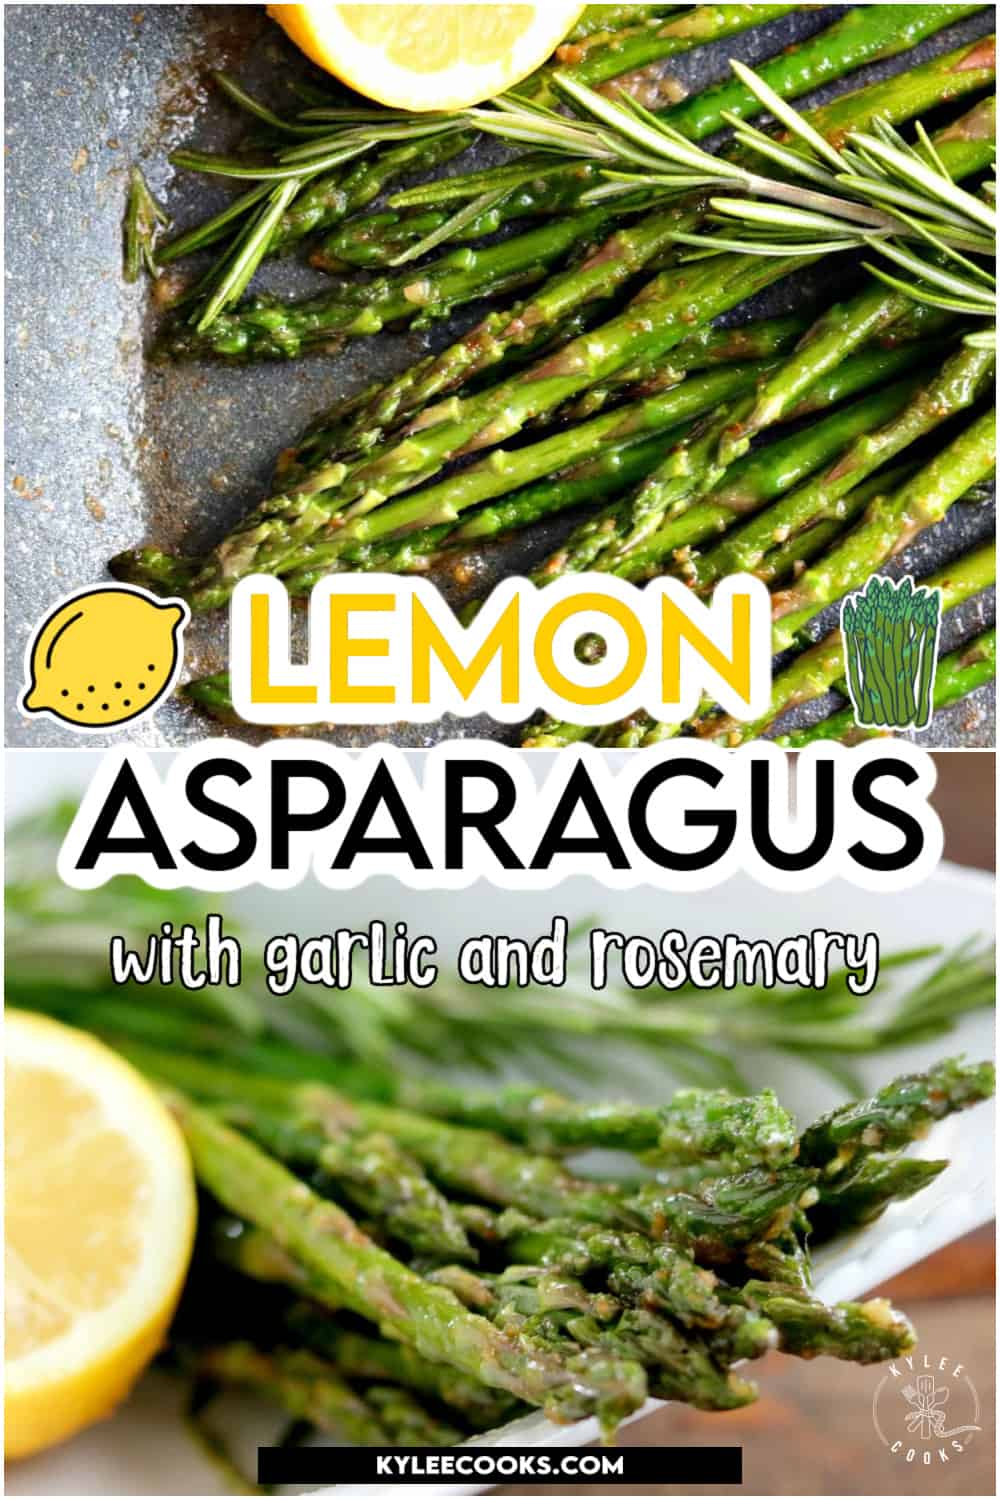 a skillet with cooked asparagus in it with lemon and rosemary, with recipe name overlaid in text.